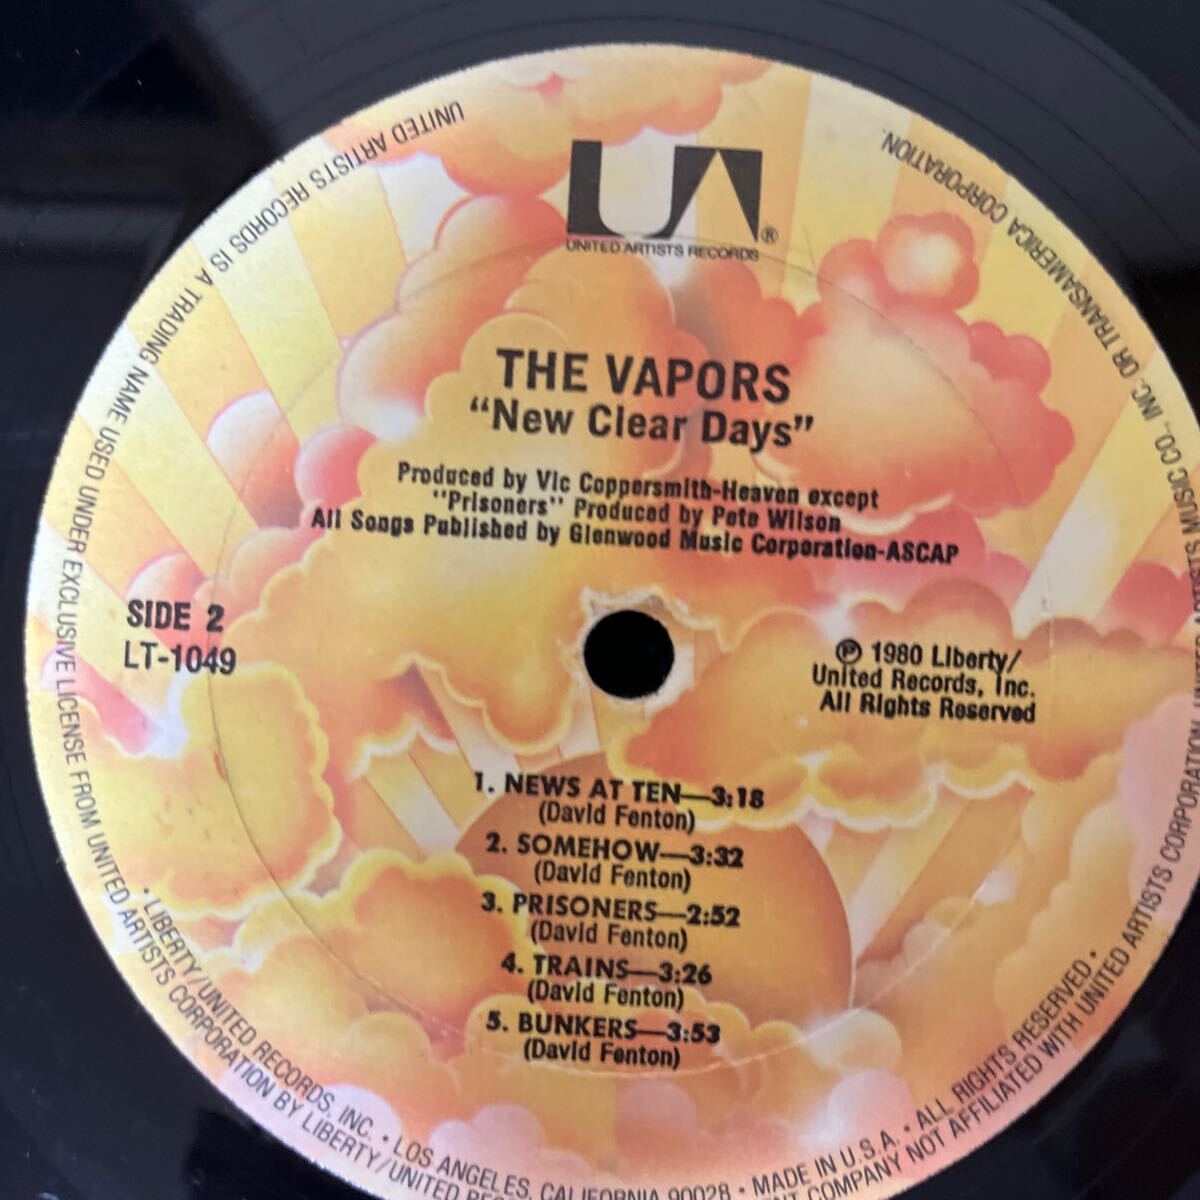 【LP】The Vapors / New Clear Days United Artists Records LT-1049 US Orig 1980 検) New Wave Power Pop Punk パンク天国_画像7